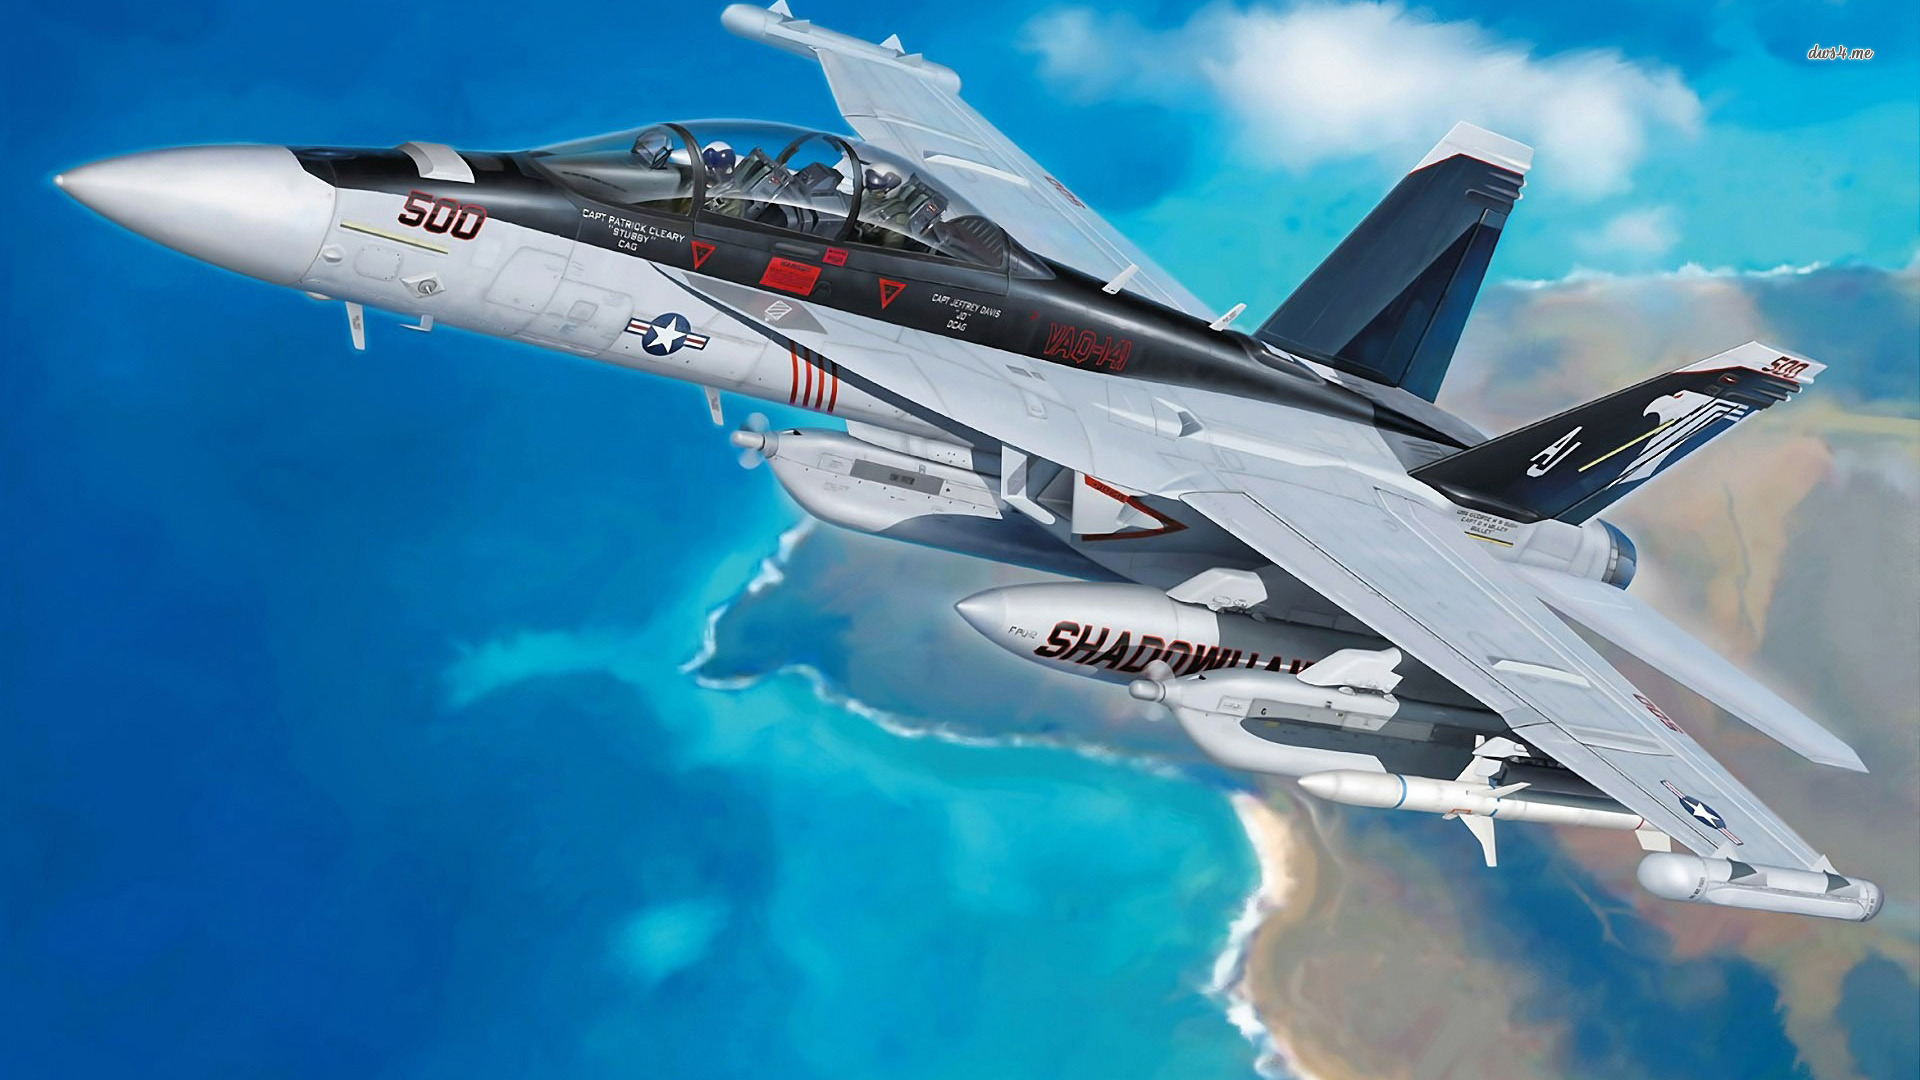 Boeing EA-18G Growler Backgrounds, Compatible - PC, Mobile, Gadgets| 1920x1080 px